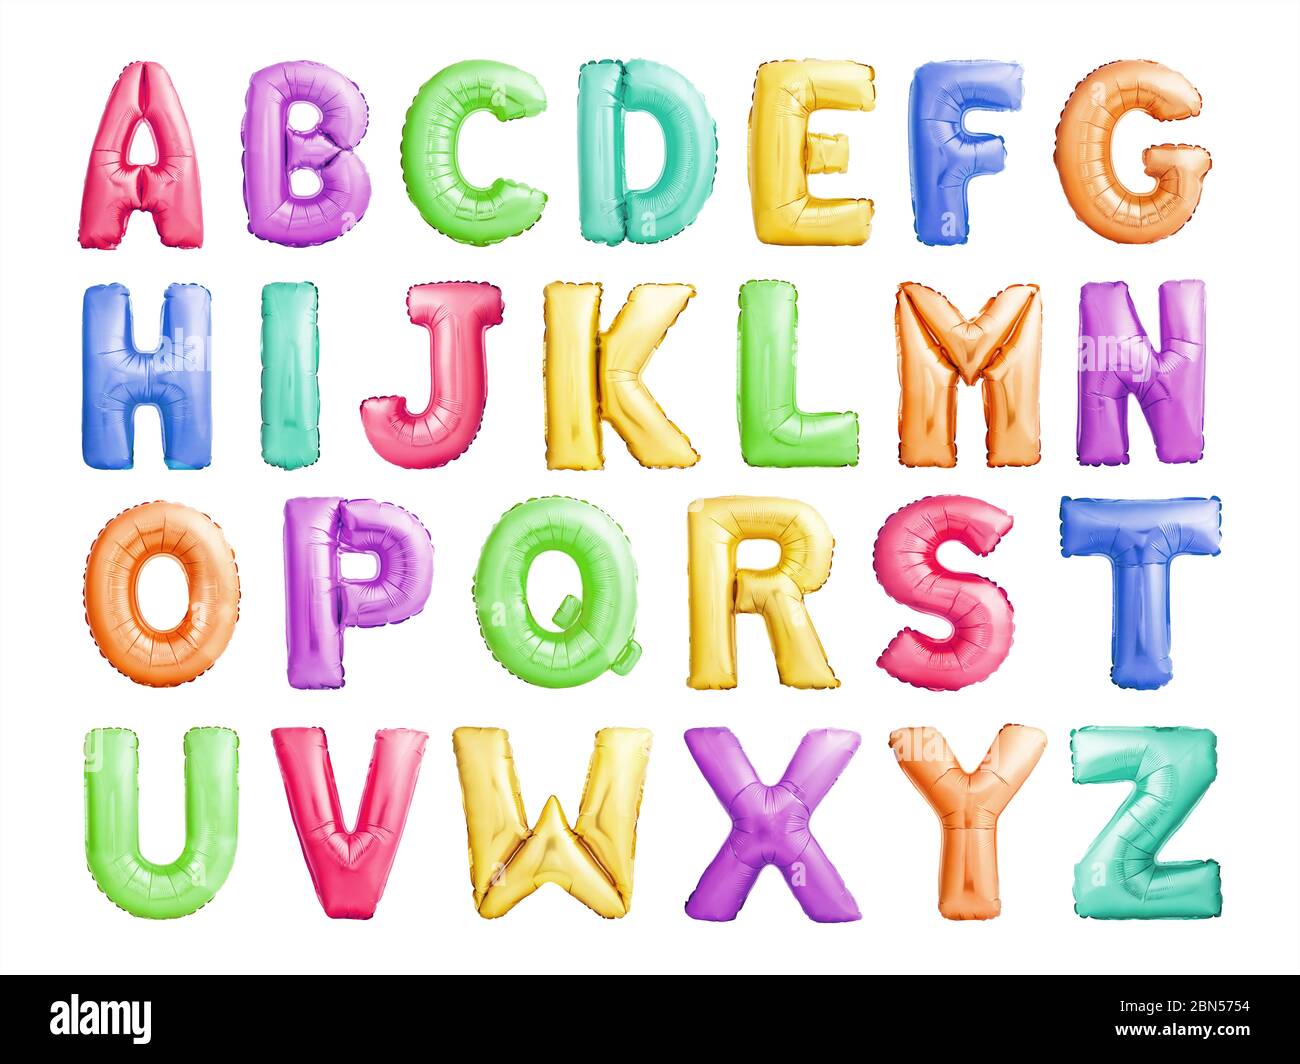 Alphabet letters font made of colorful inflatable balloons ...